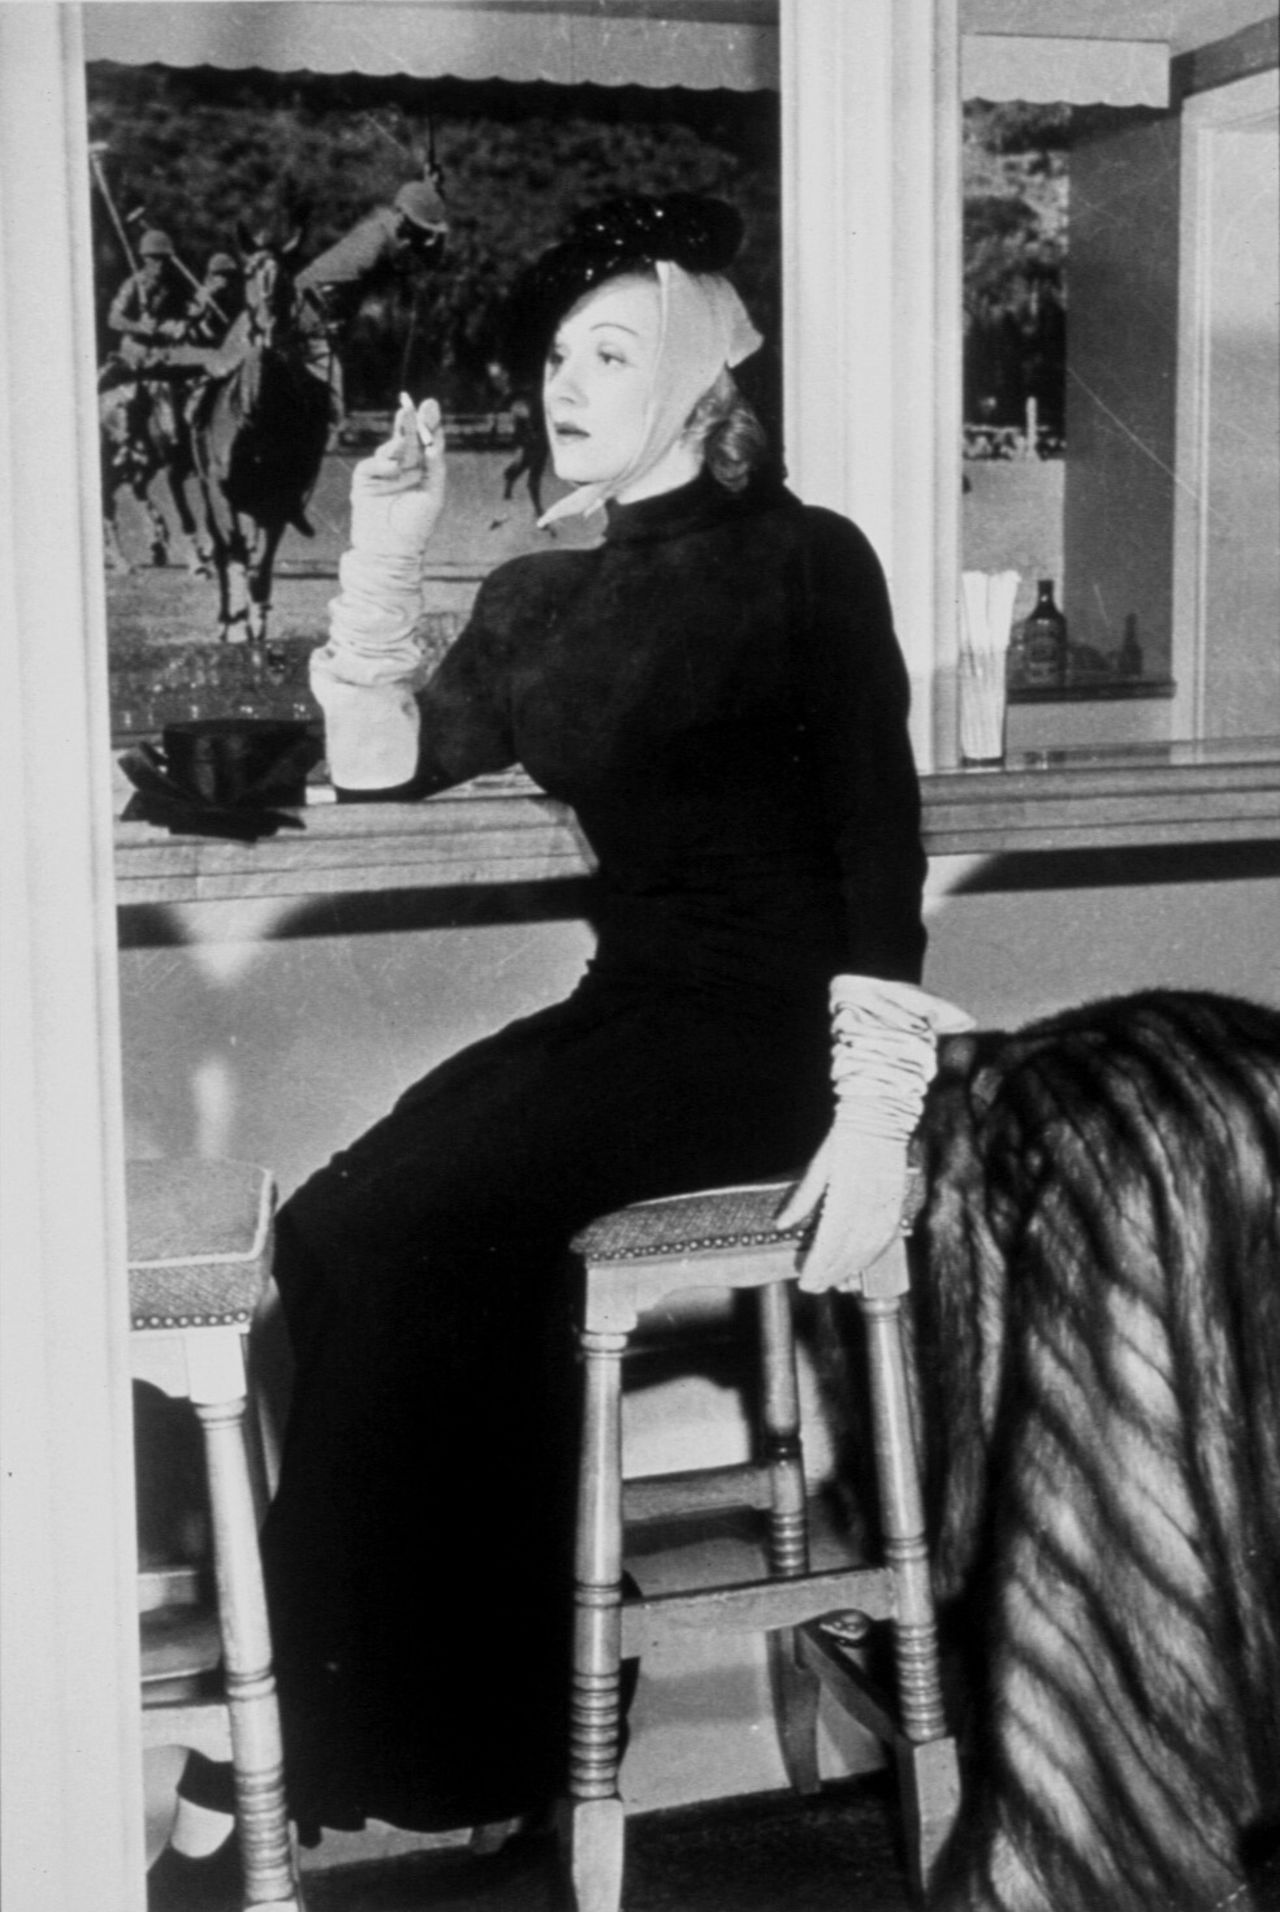 Marlene Dietrich convinced the Beverly Hills Hotel to ease its dress code so she could wear pants in the Polo Lounge. Behind her, the photo depicts a polo-playing Will Rodgers. 